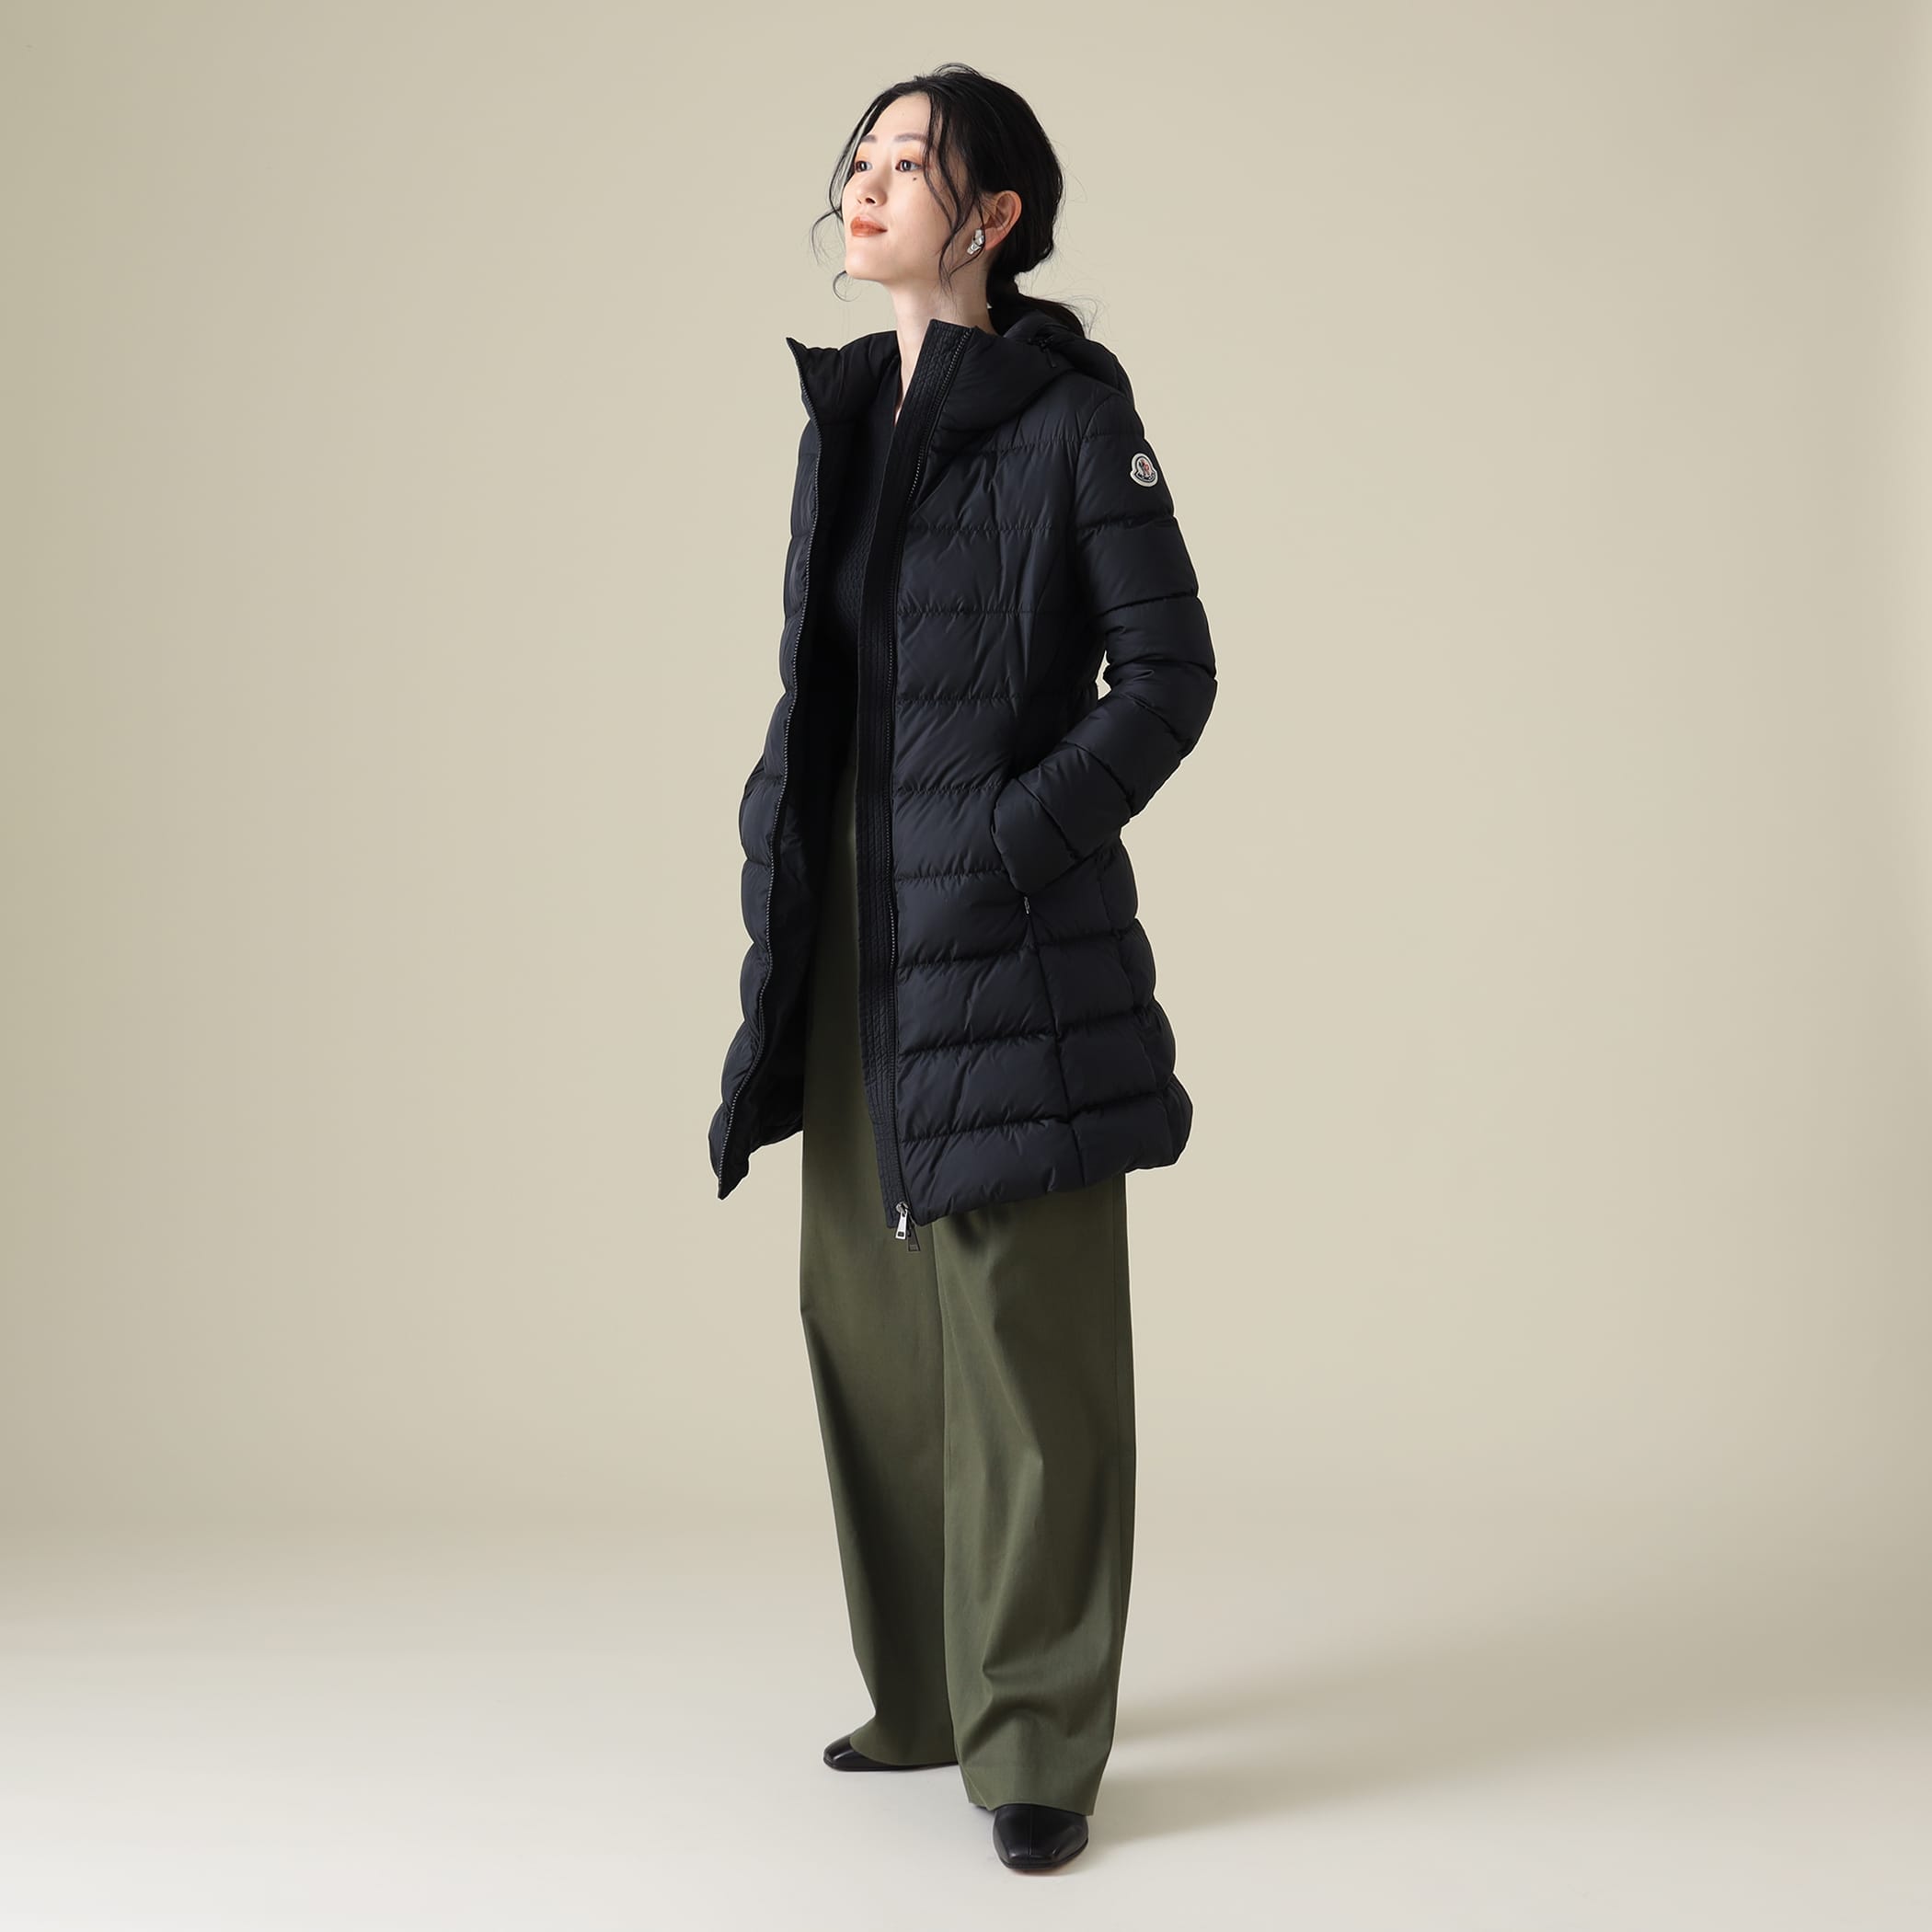 Demi-Luxe BEAMS Demi-Luxe BEAMS MONCLER GIE 羽絨外套 